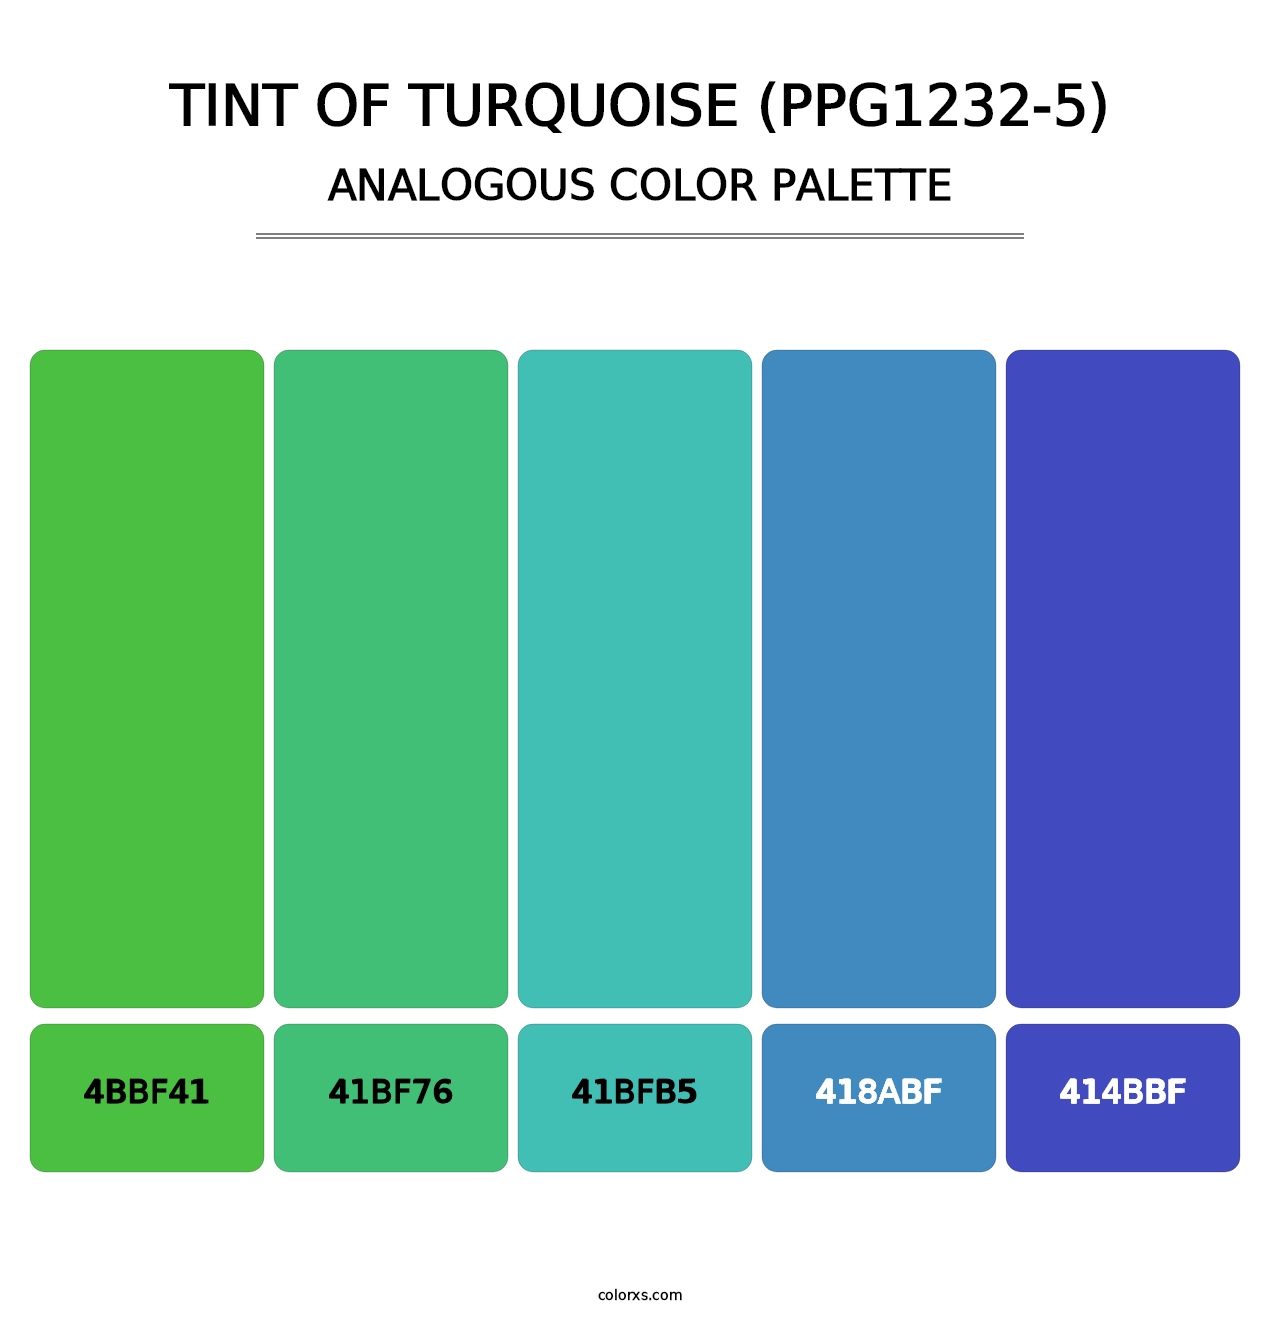 Tint Of Turquoise (PPG1232-5) - Analogous Color Palette